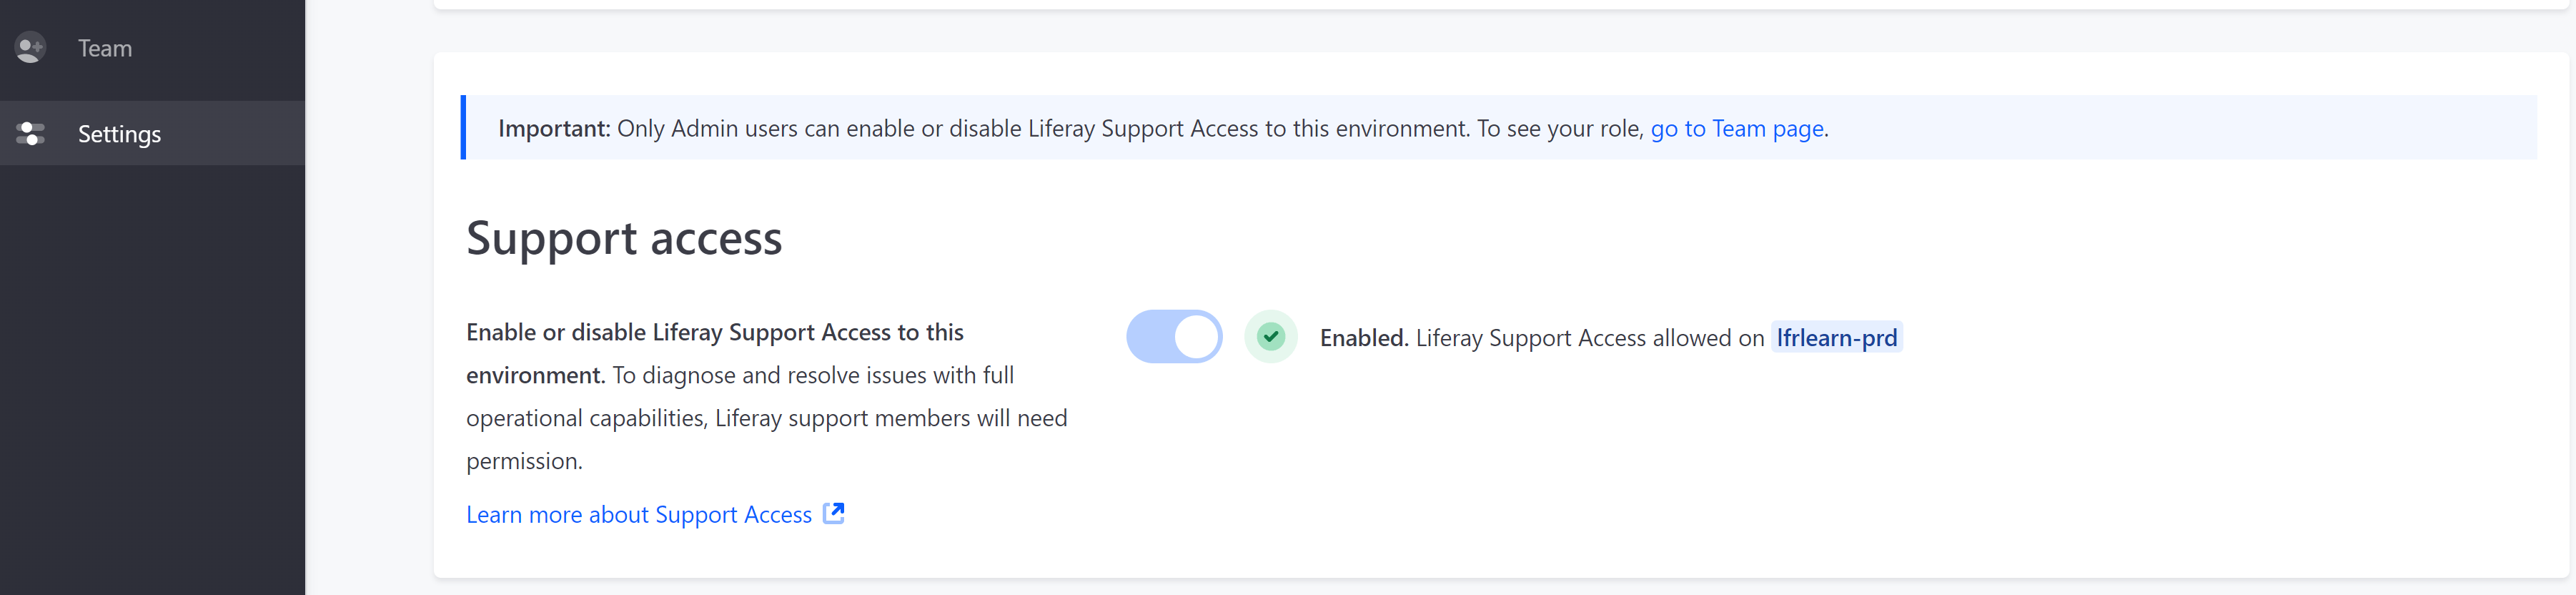 Administrators can enable or disable Support Access.